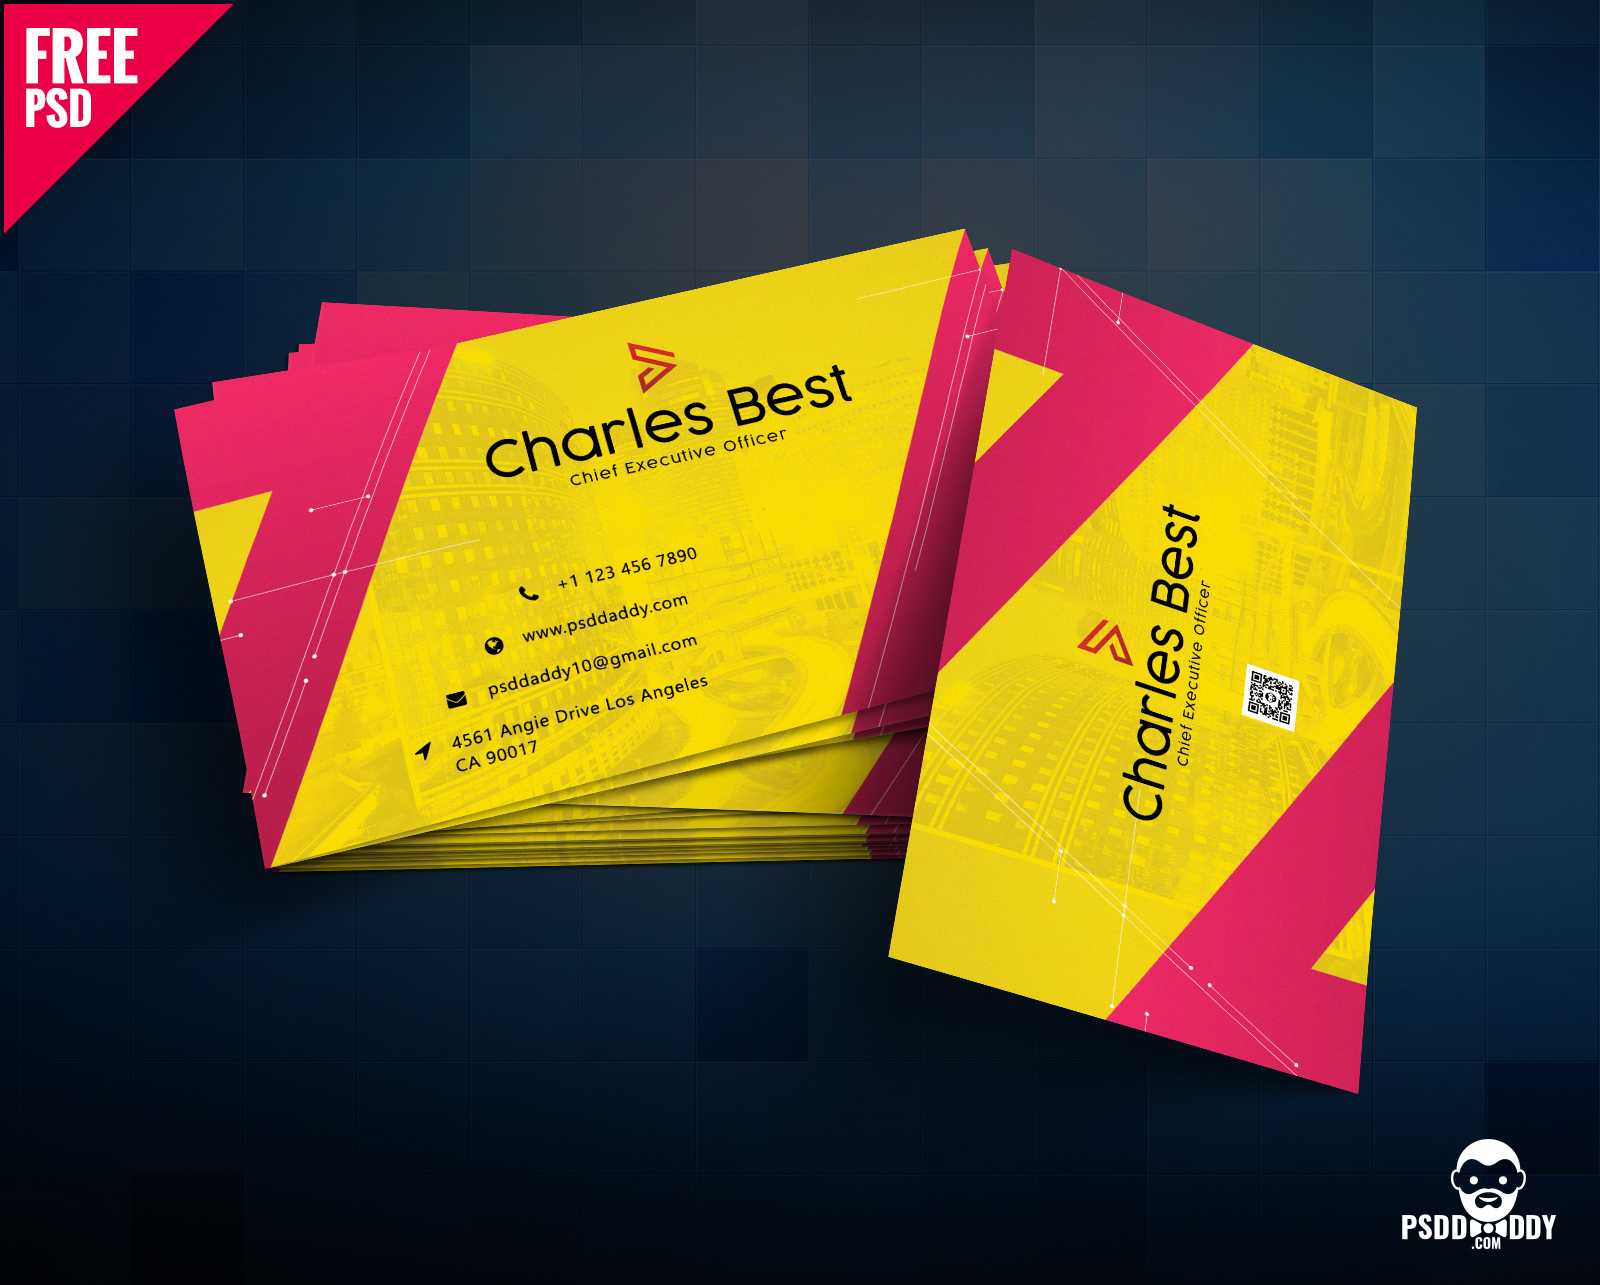 Download] Creative Business Card Free Psd | Psddaddy Pertaining To Business Card Size Psd Template